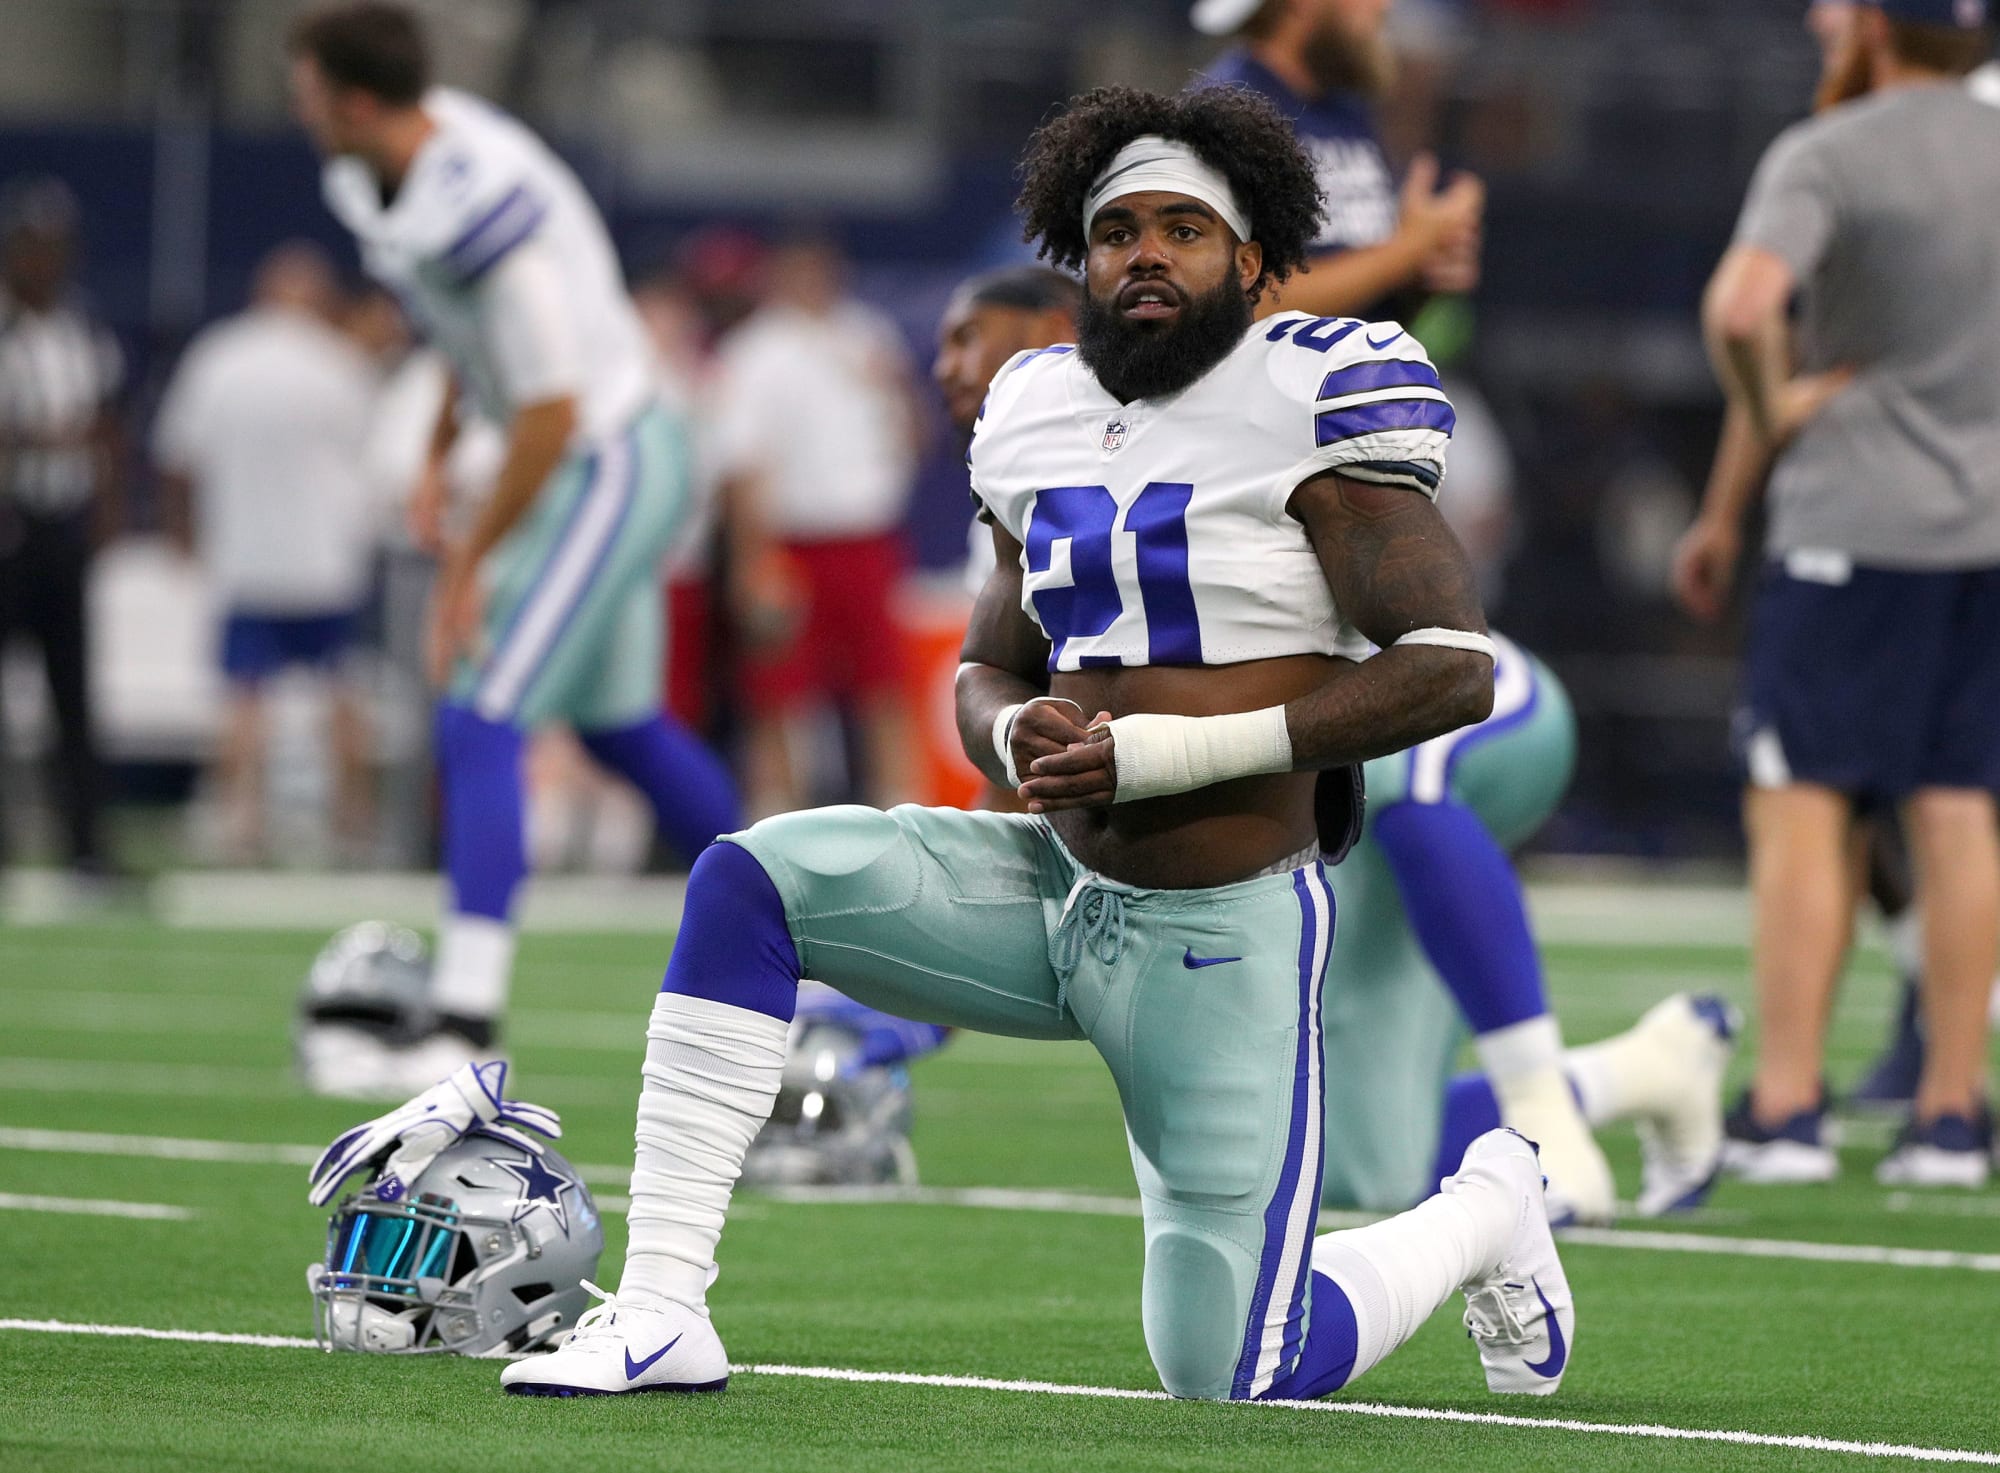 The Dallas Cowboys comeback player of the year and MVPs will be…